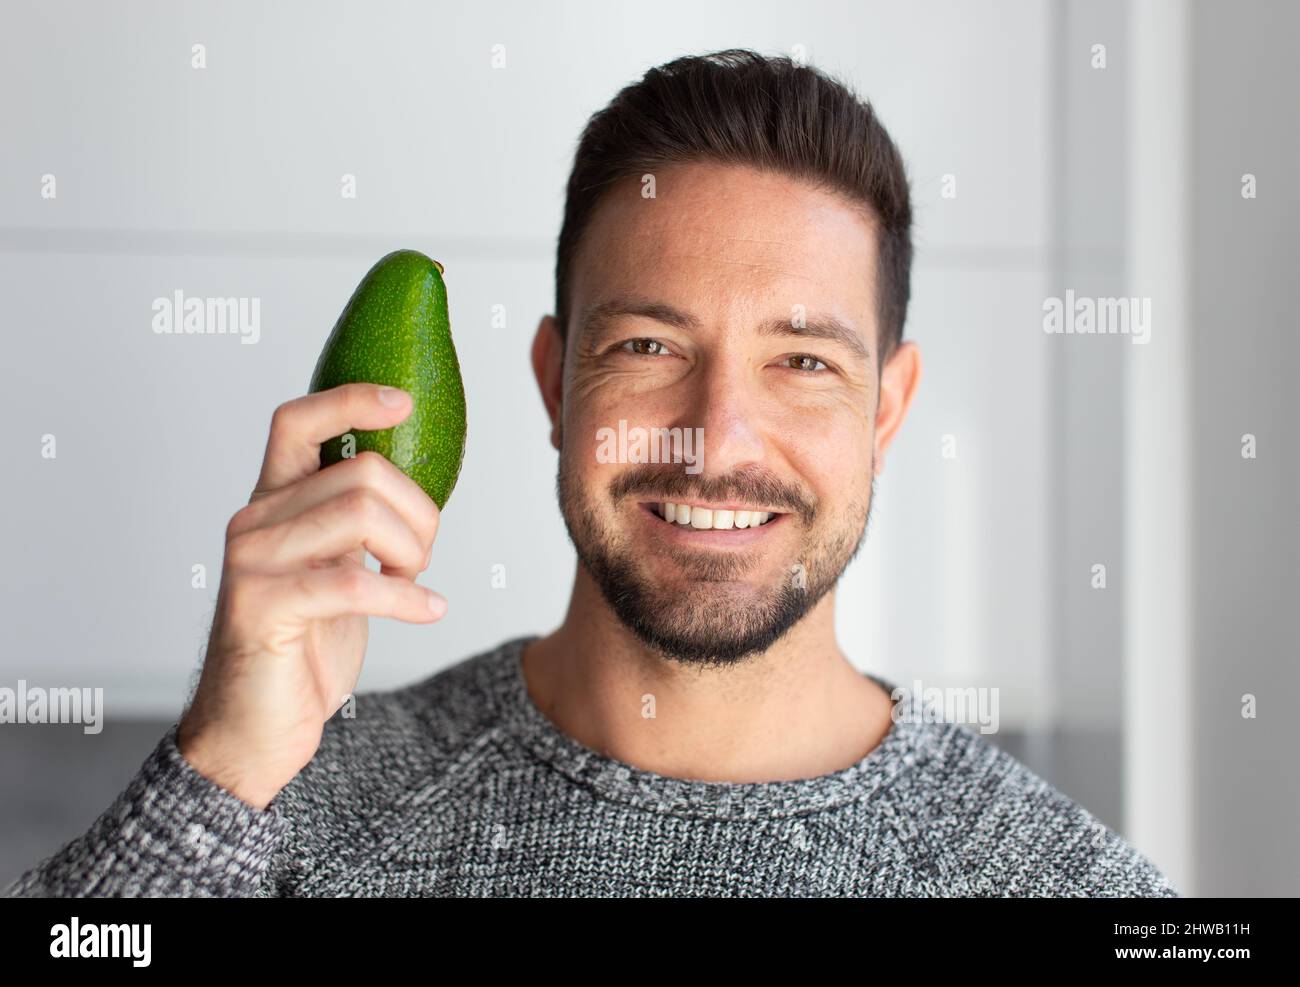 Happy young man with toothy smile holding avocado in kitchen portrait Stock Photo